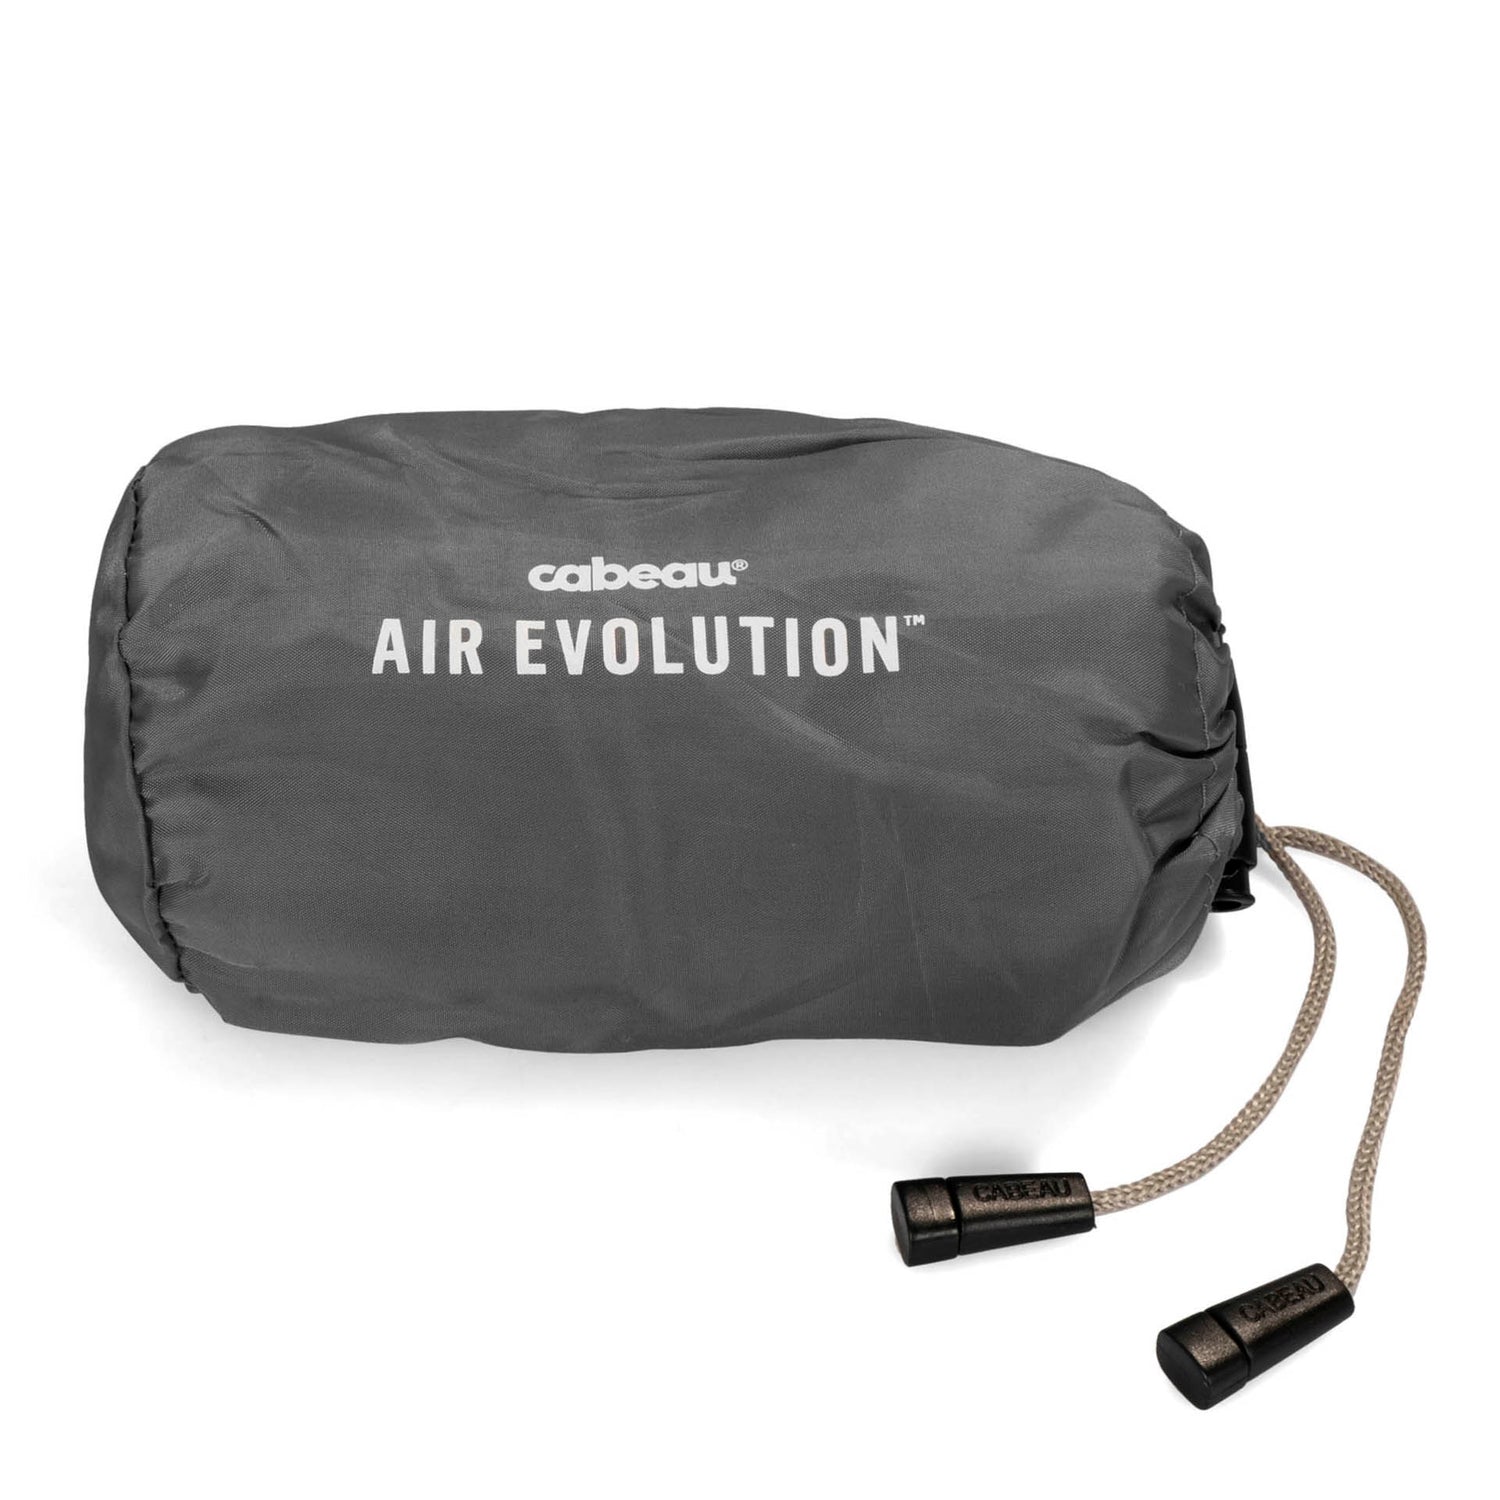 A polyester pouch designed by Cabeau for a travel pillow called Air Evolution showing the brand and collection name printed on the front with its drawstrings loose on the floor.